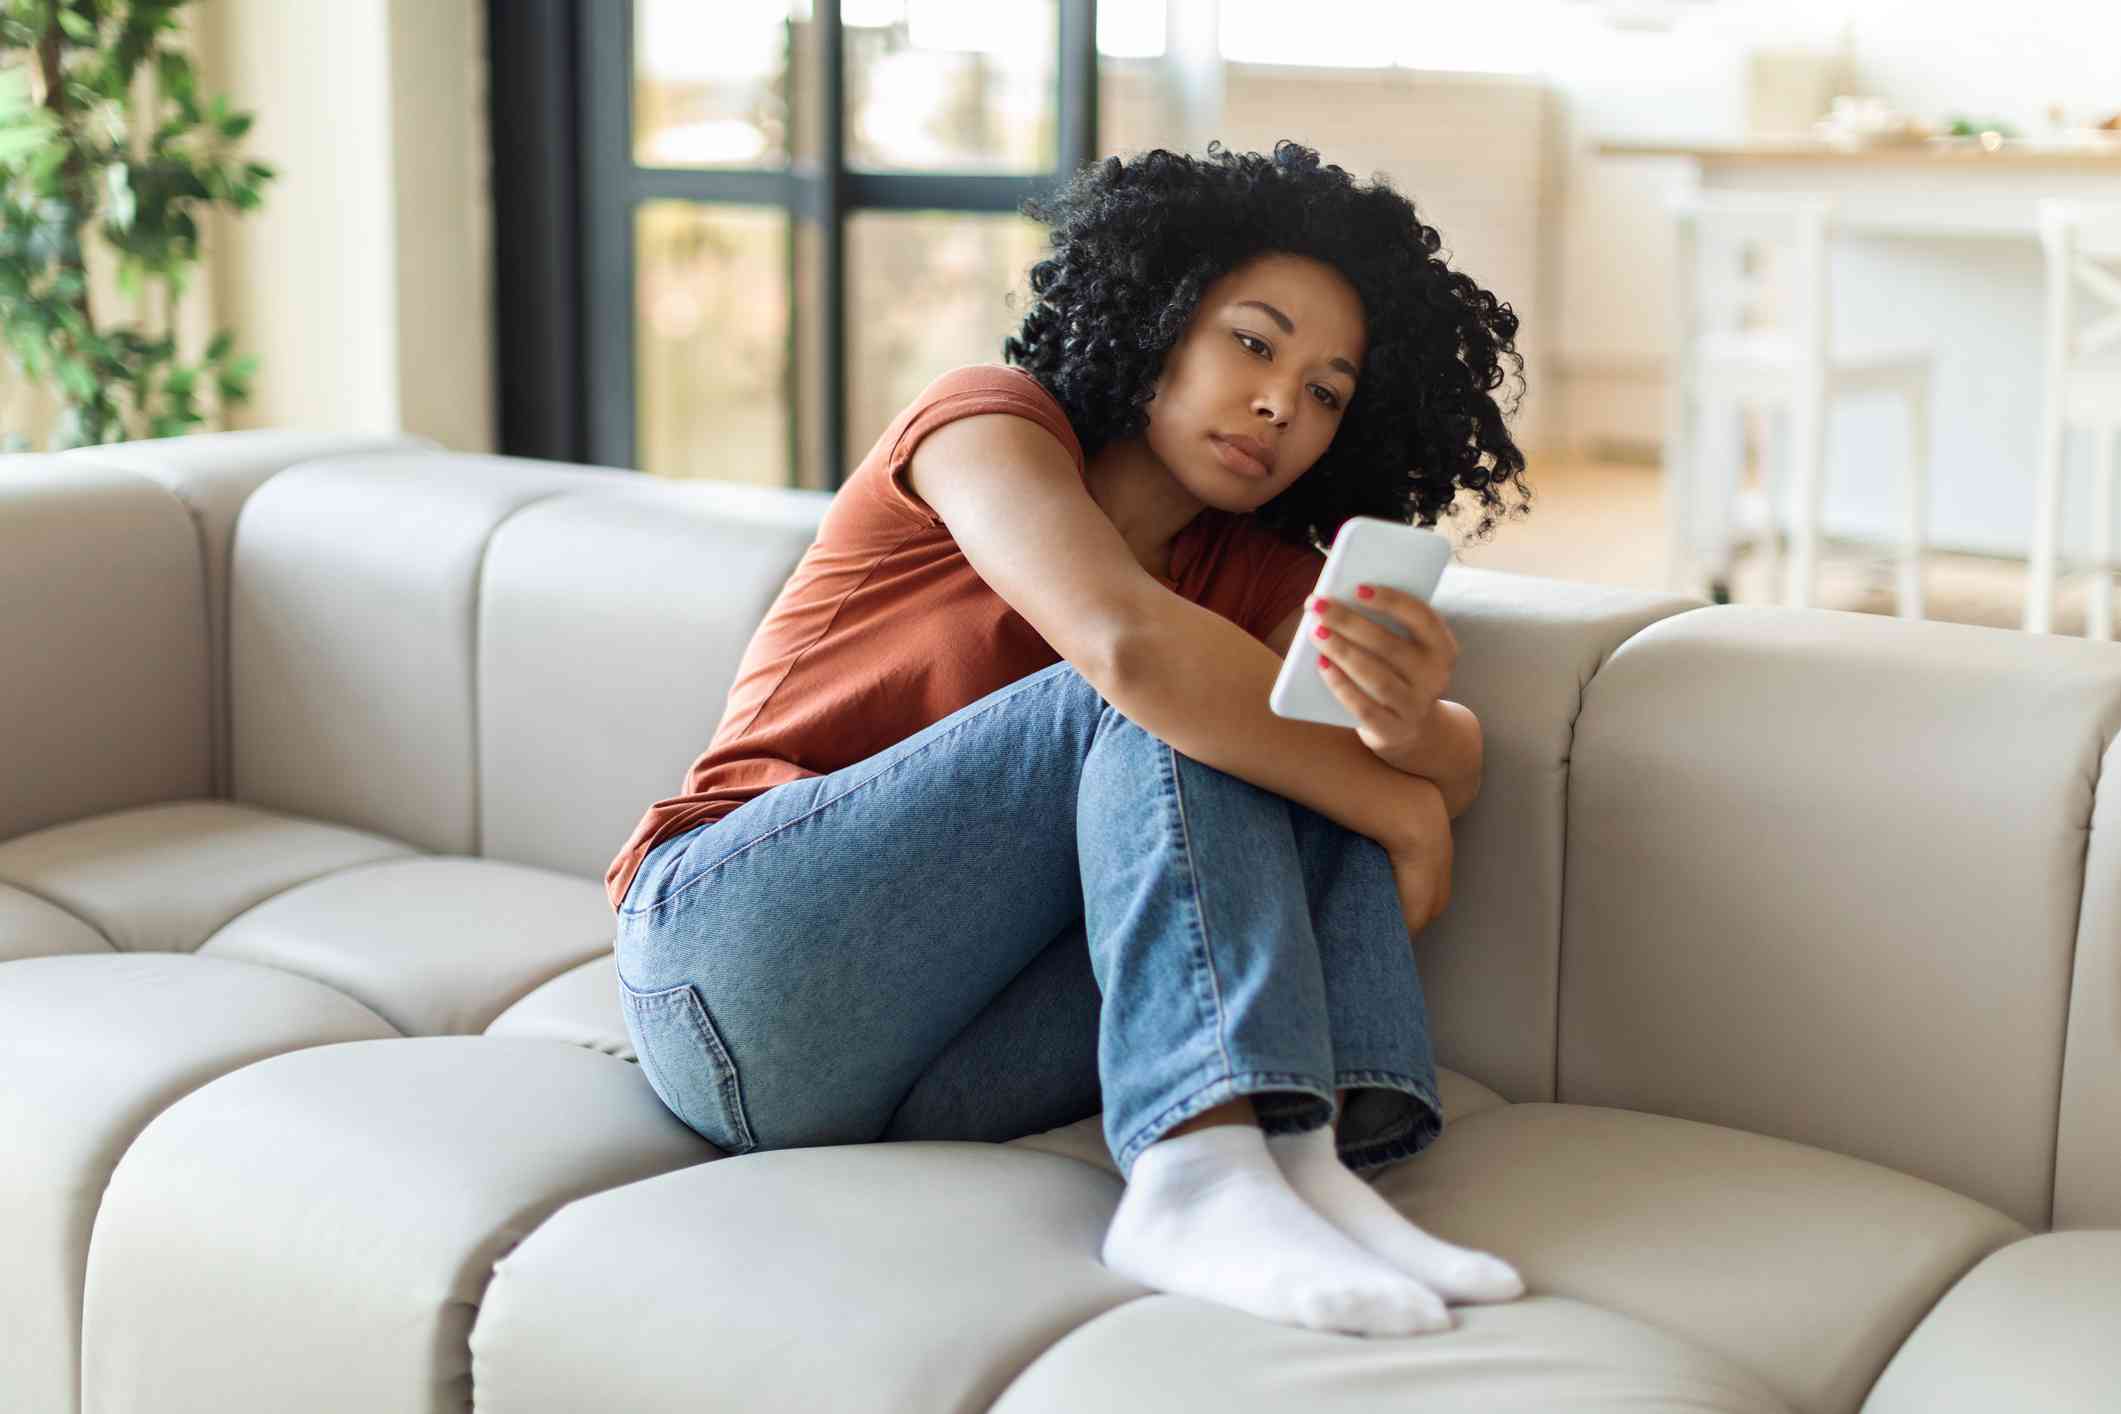 A woman in a brown shirt sits curled up on the couch and looks at the phone in her hand with a sad expression.